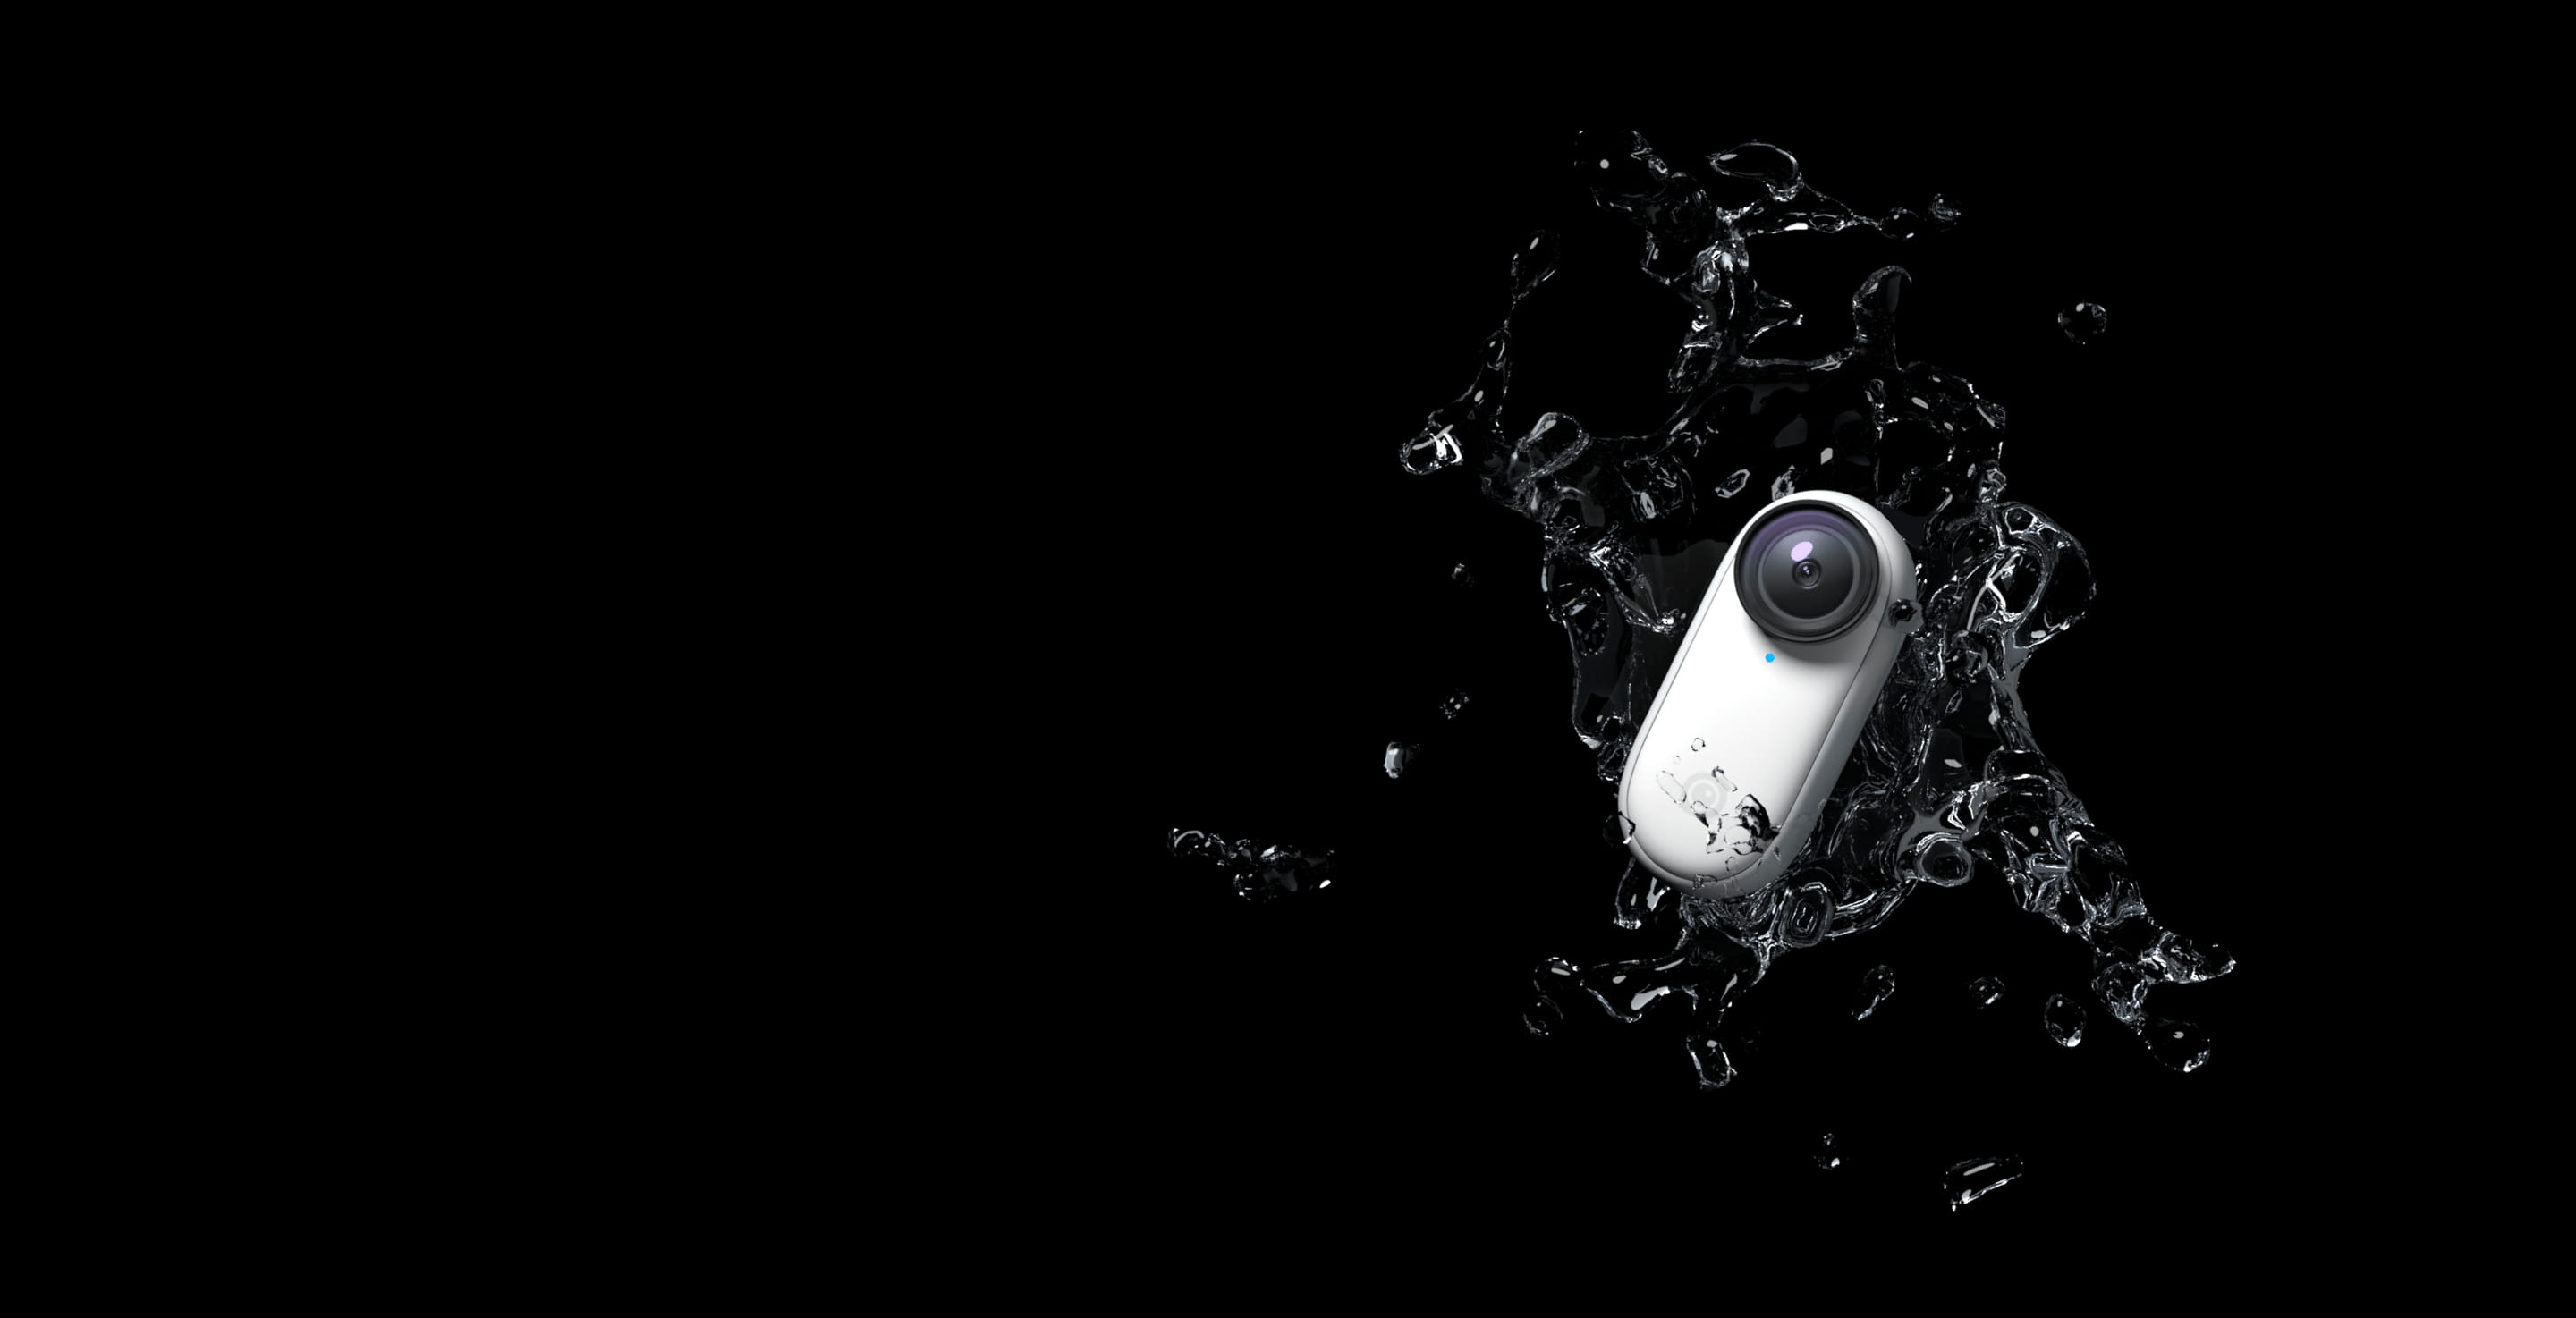 Insta360 GO 2 – The World's Smallest Action Camera